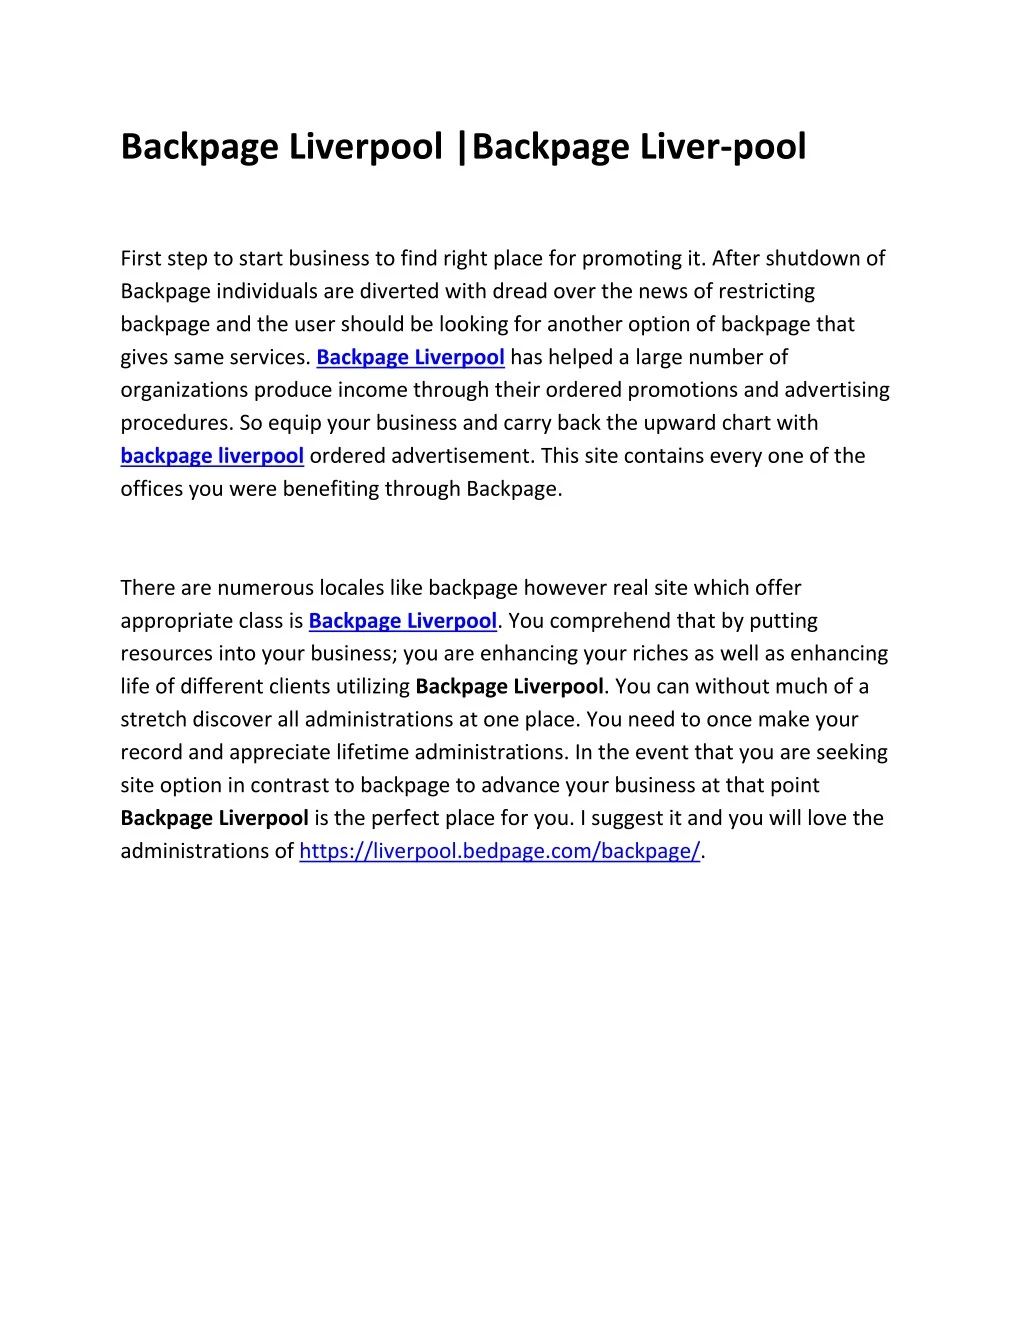 backpage liverpool backpage liver pool